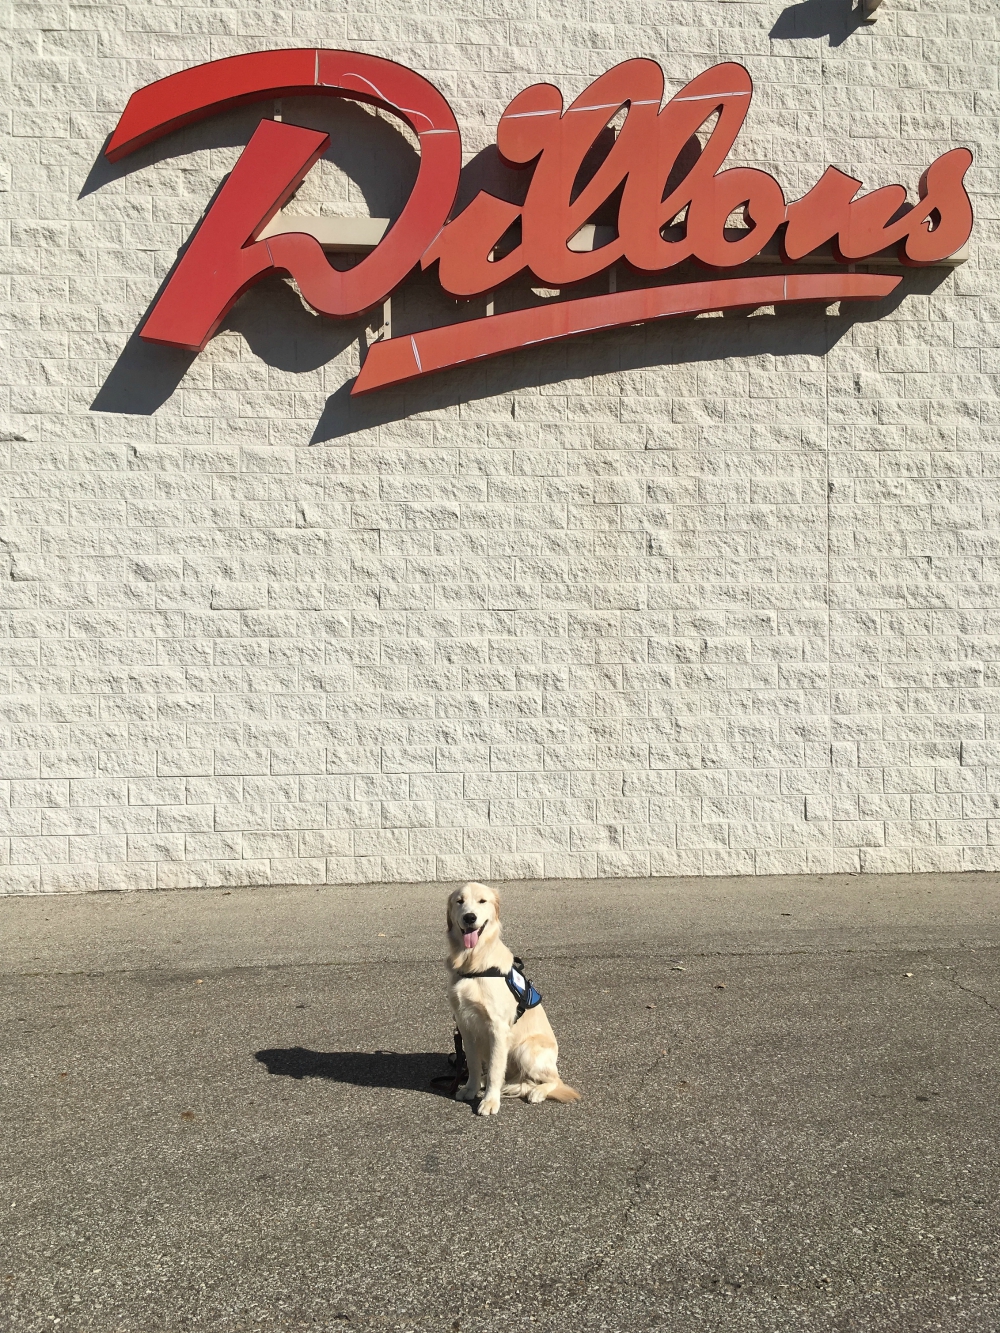 Dillon in front of the grocery store chain he was named after. Photo Courtesy of Julie.